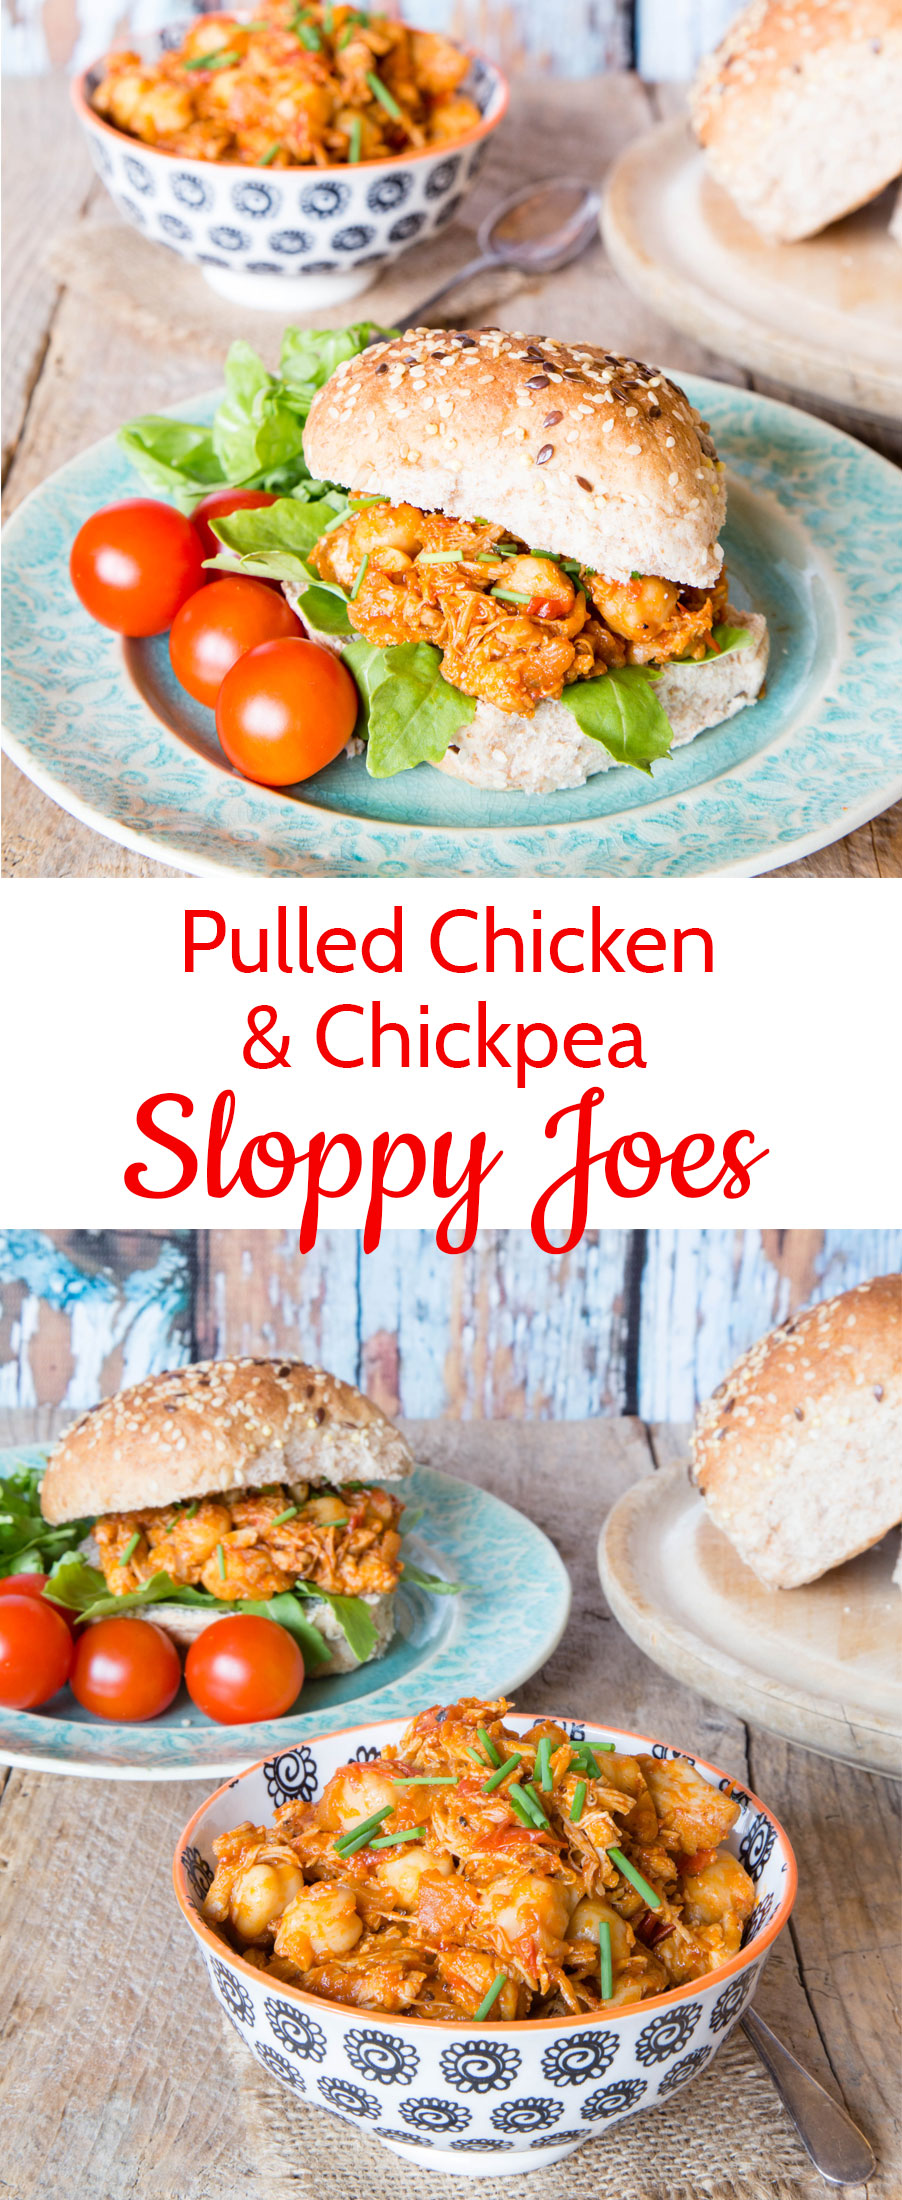 Enjoy these protein packed pulled chicken and chickpea sloppy joes as a great alternative to yet another burger.